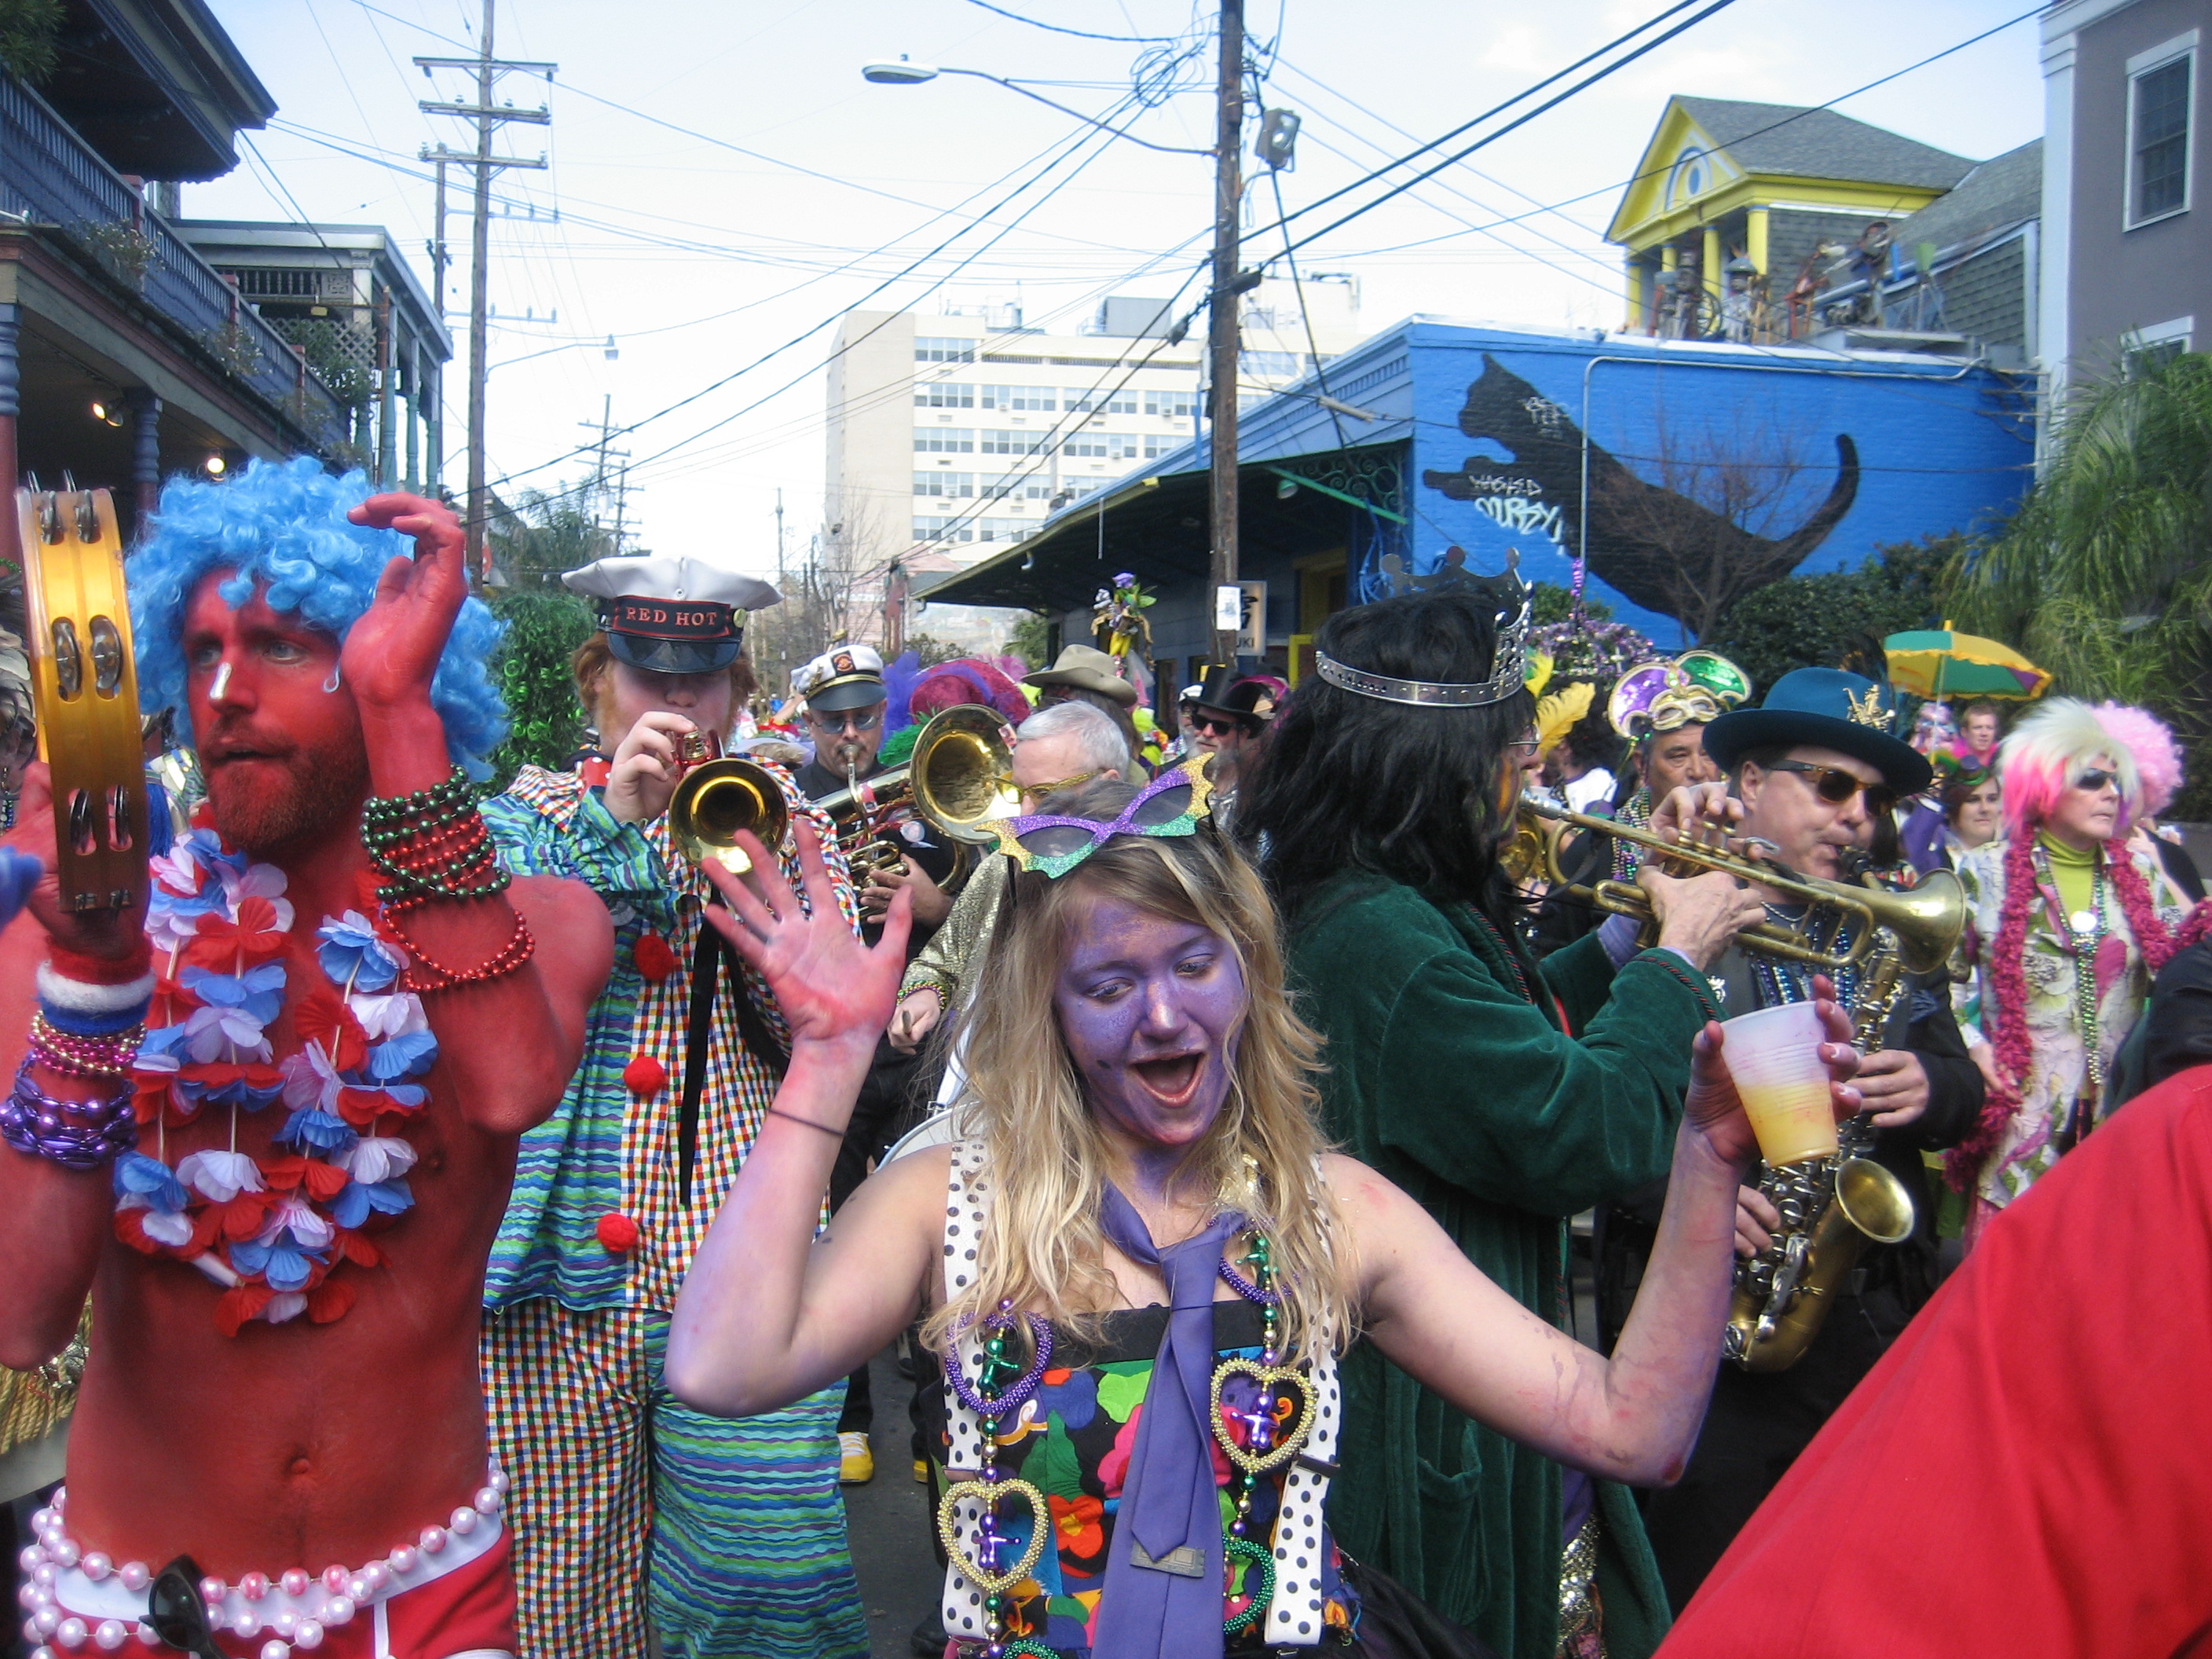 A image of a chaotic Mardi Gras street. Everyone is painted in colorful facepaint and dancing or having fun. In the front is a woman in purple face paint yelling. 